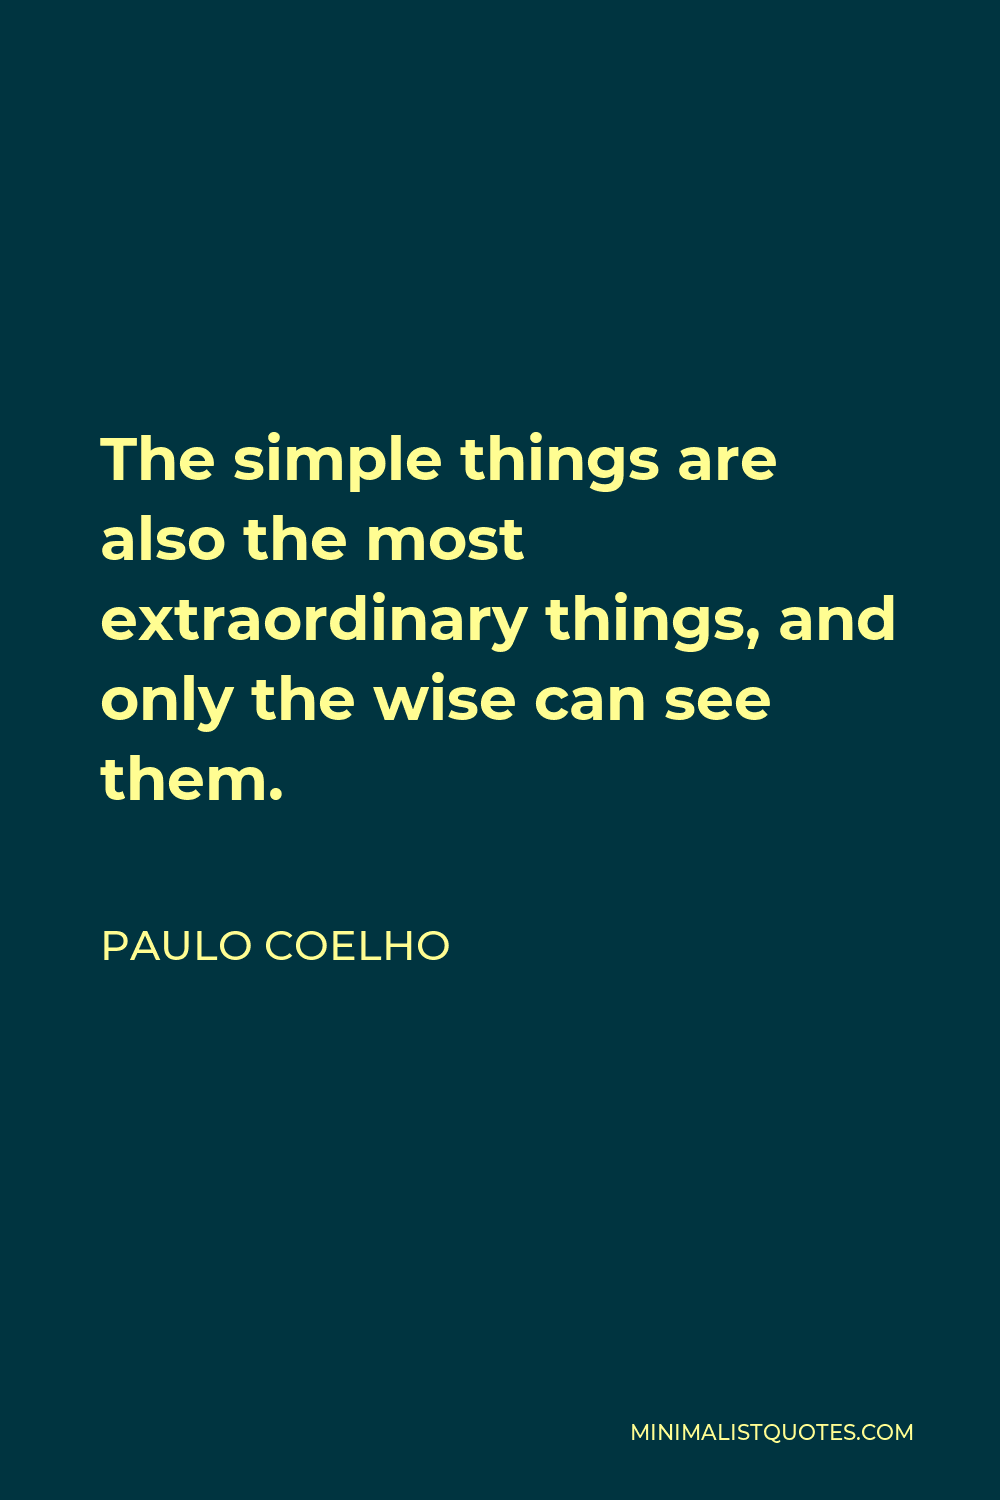 Paulo Coelho Quote - The simple things are also the most extraordinary things, and only the wise can see them.